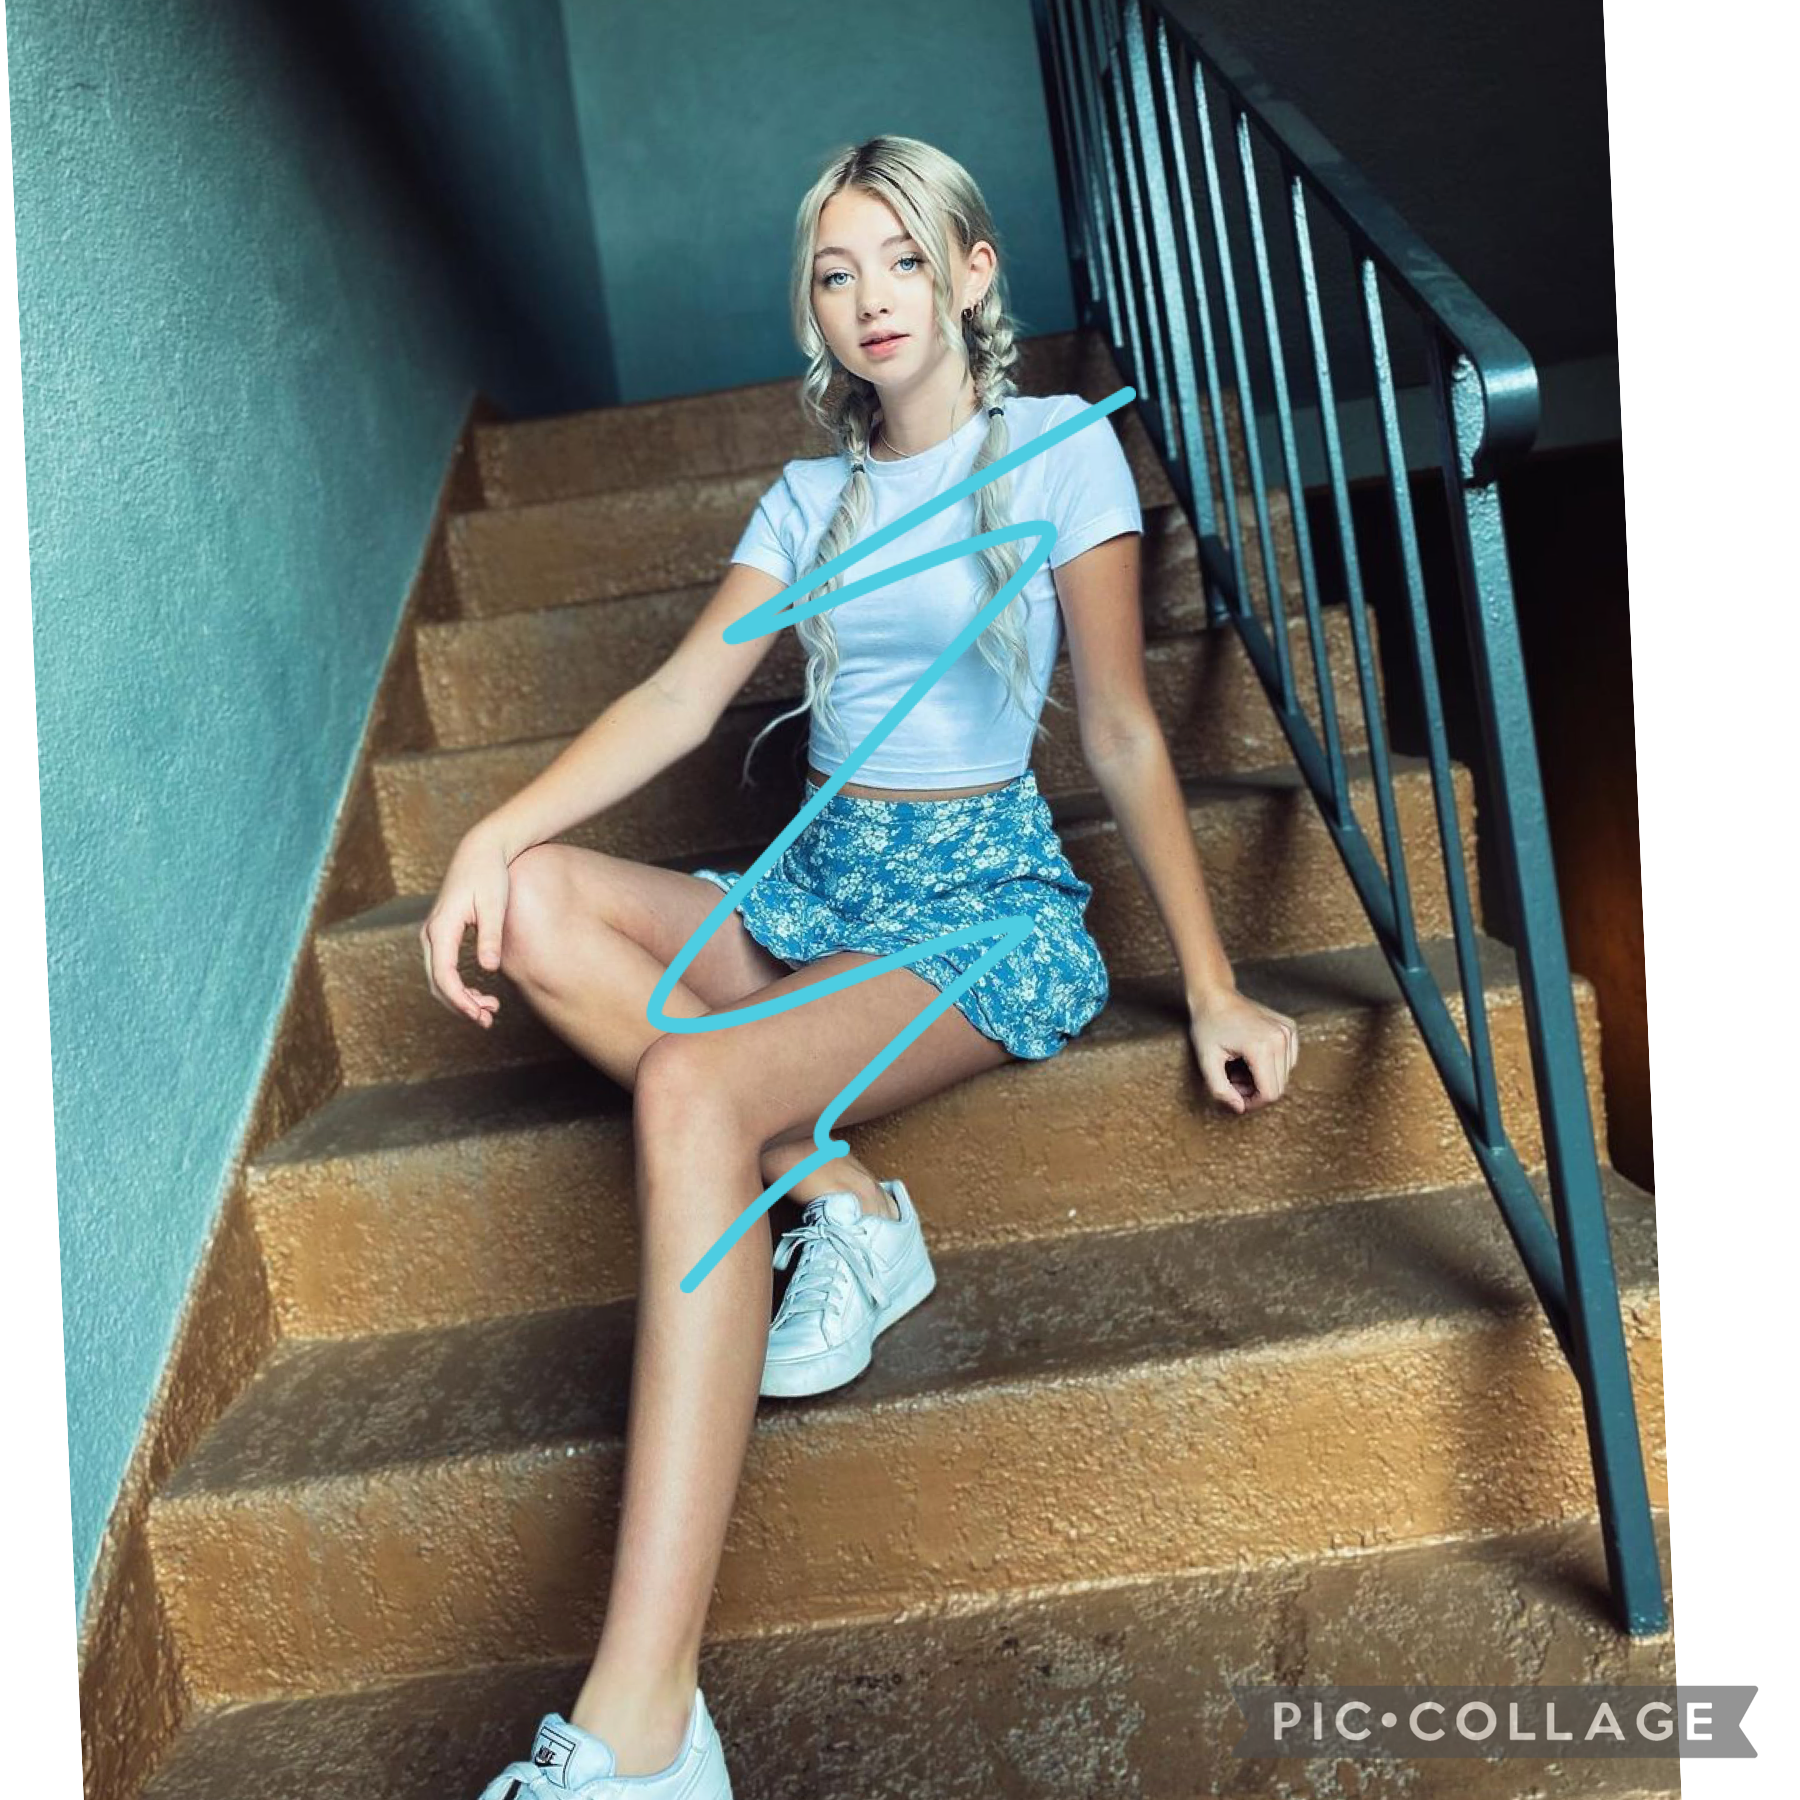 Sitting on the step